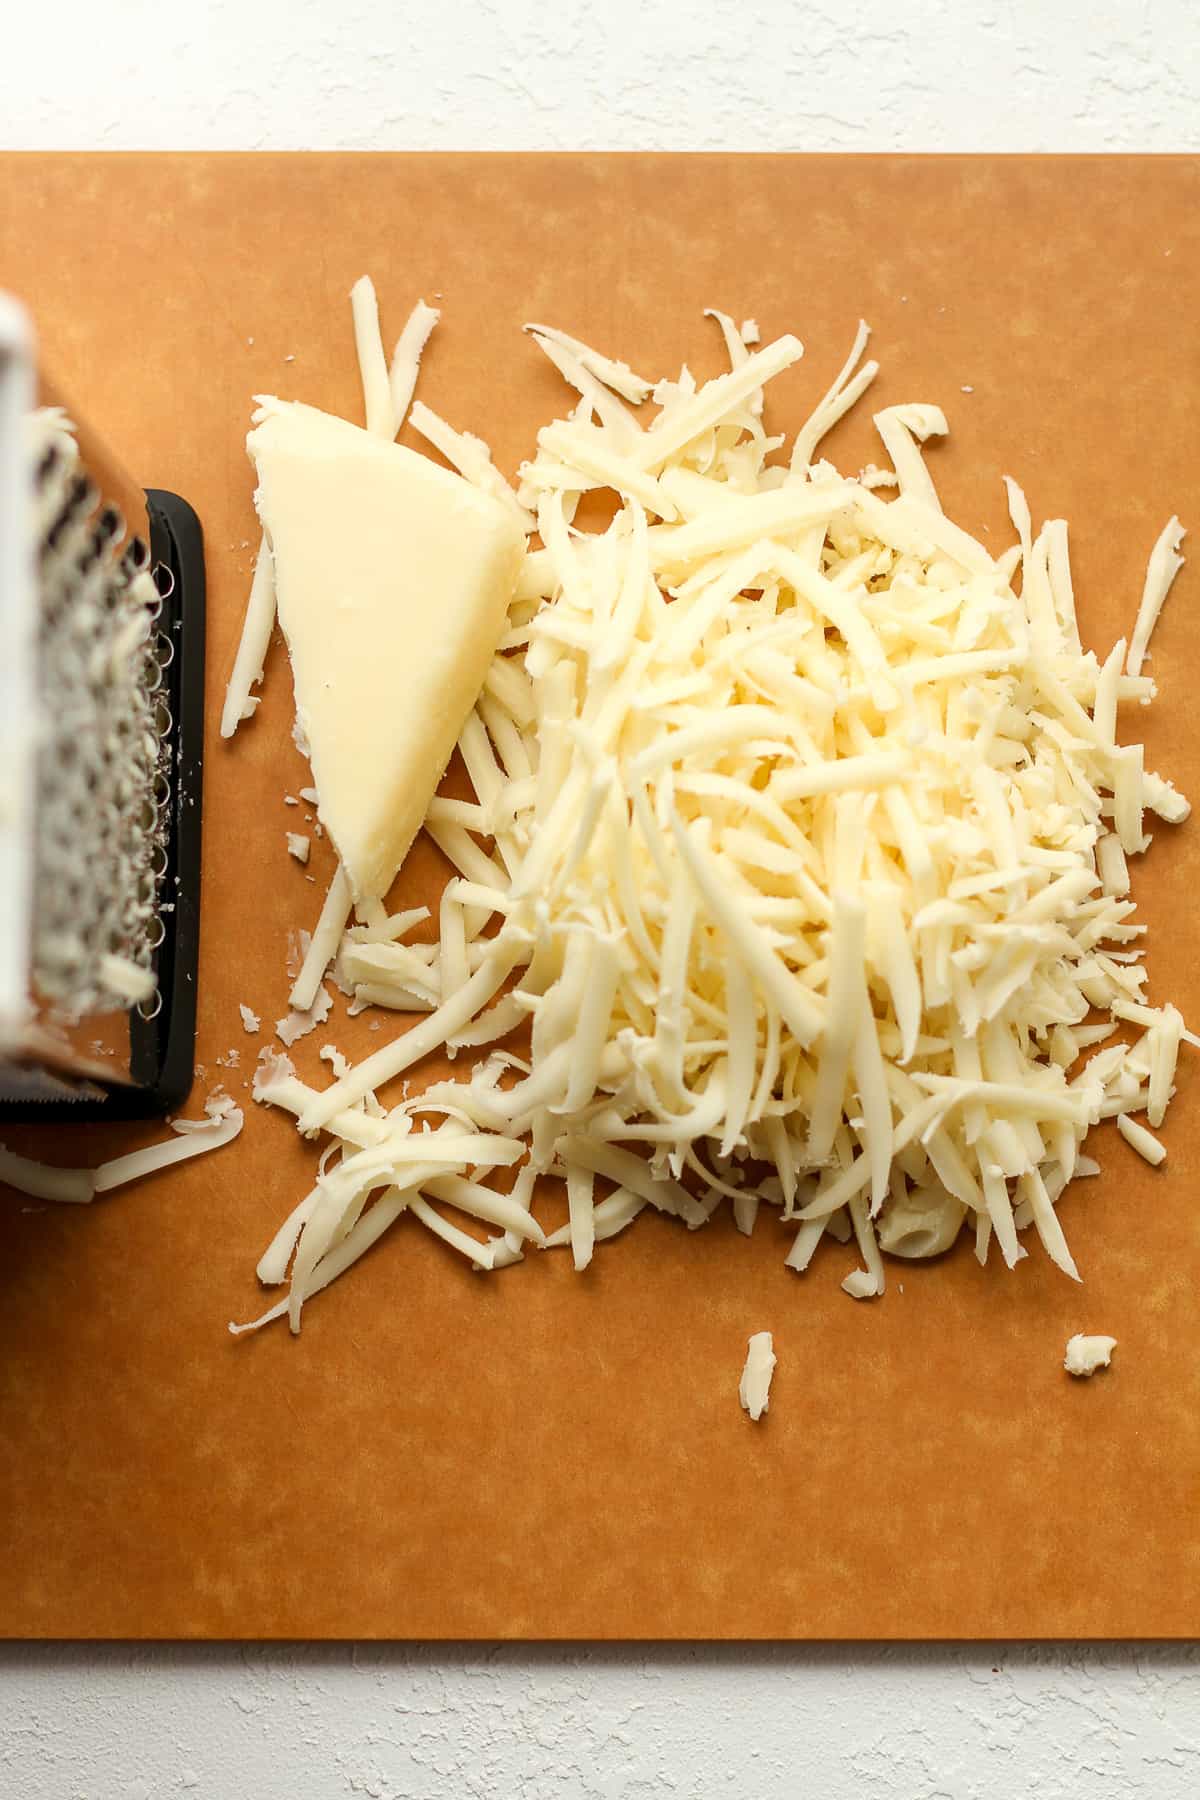 A board of the shredded quiche cheese.